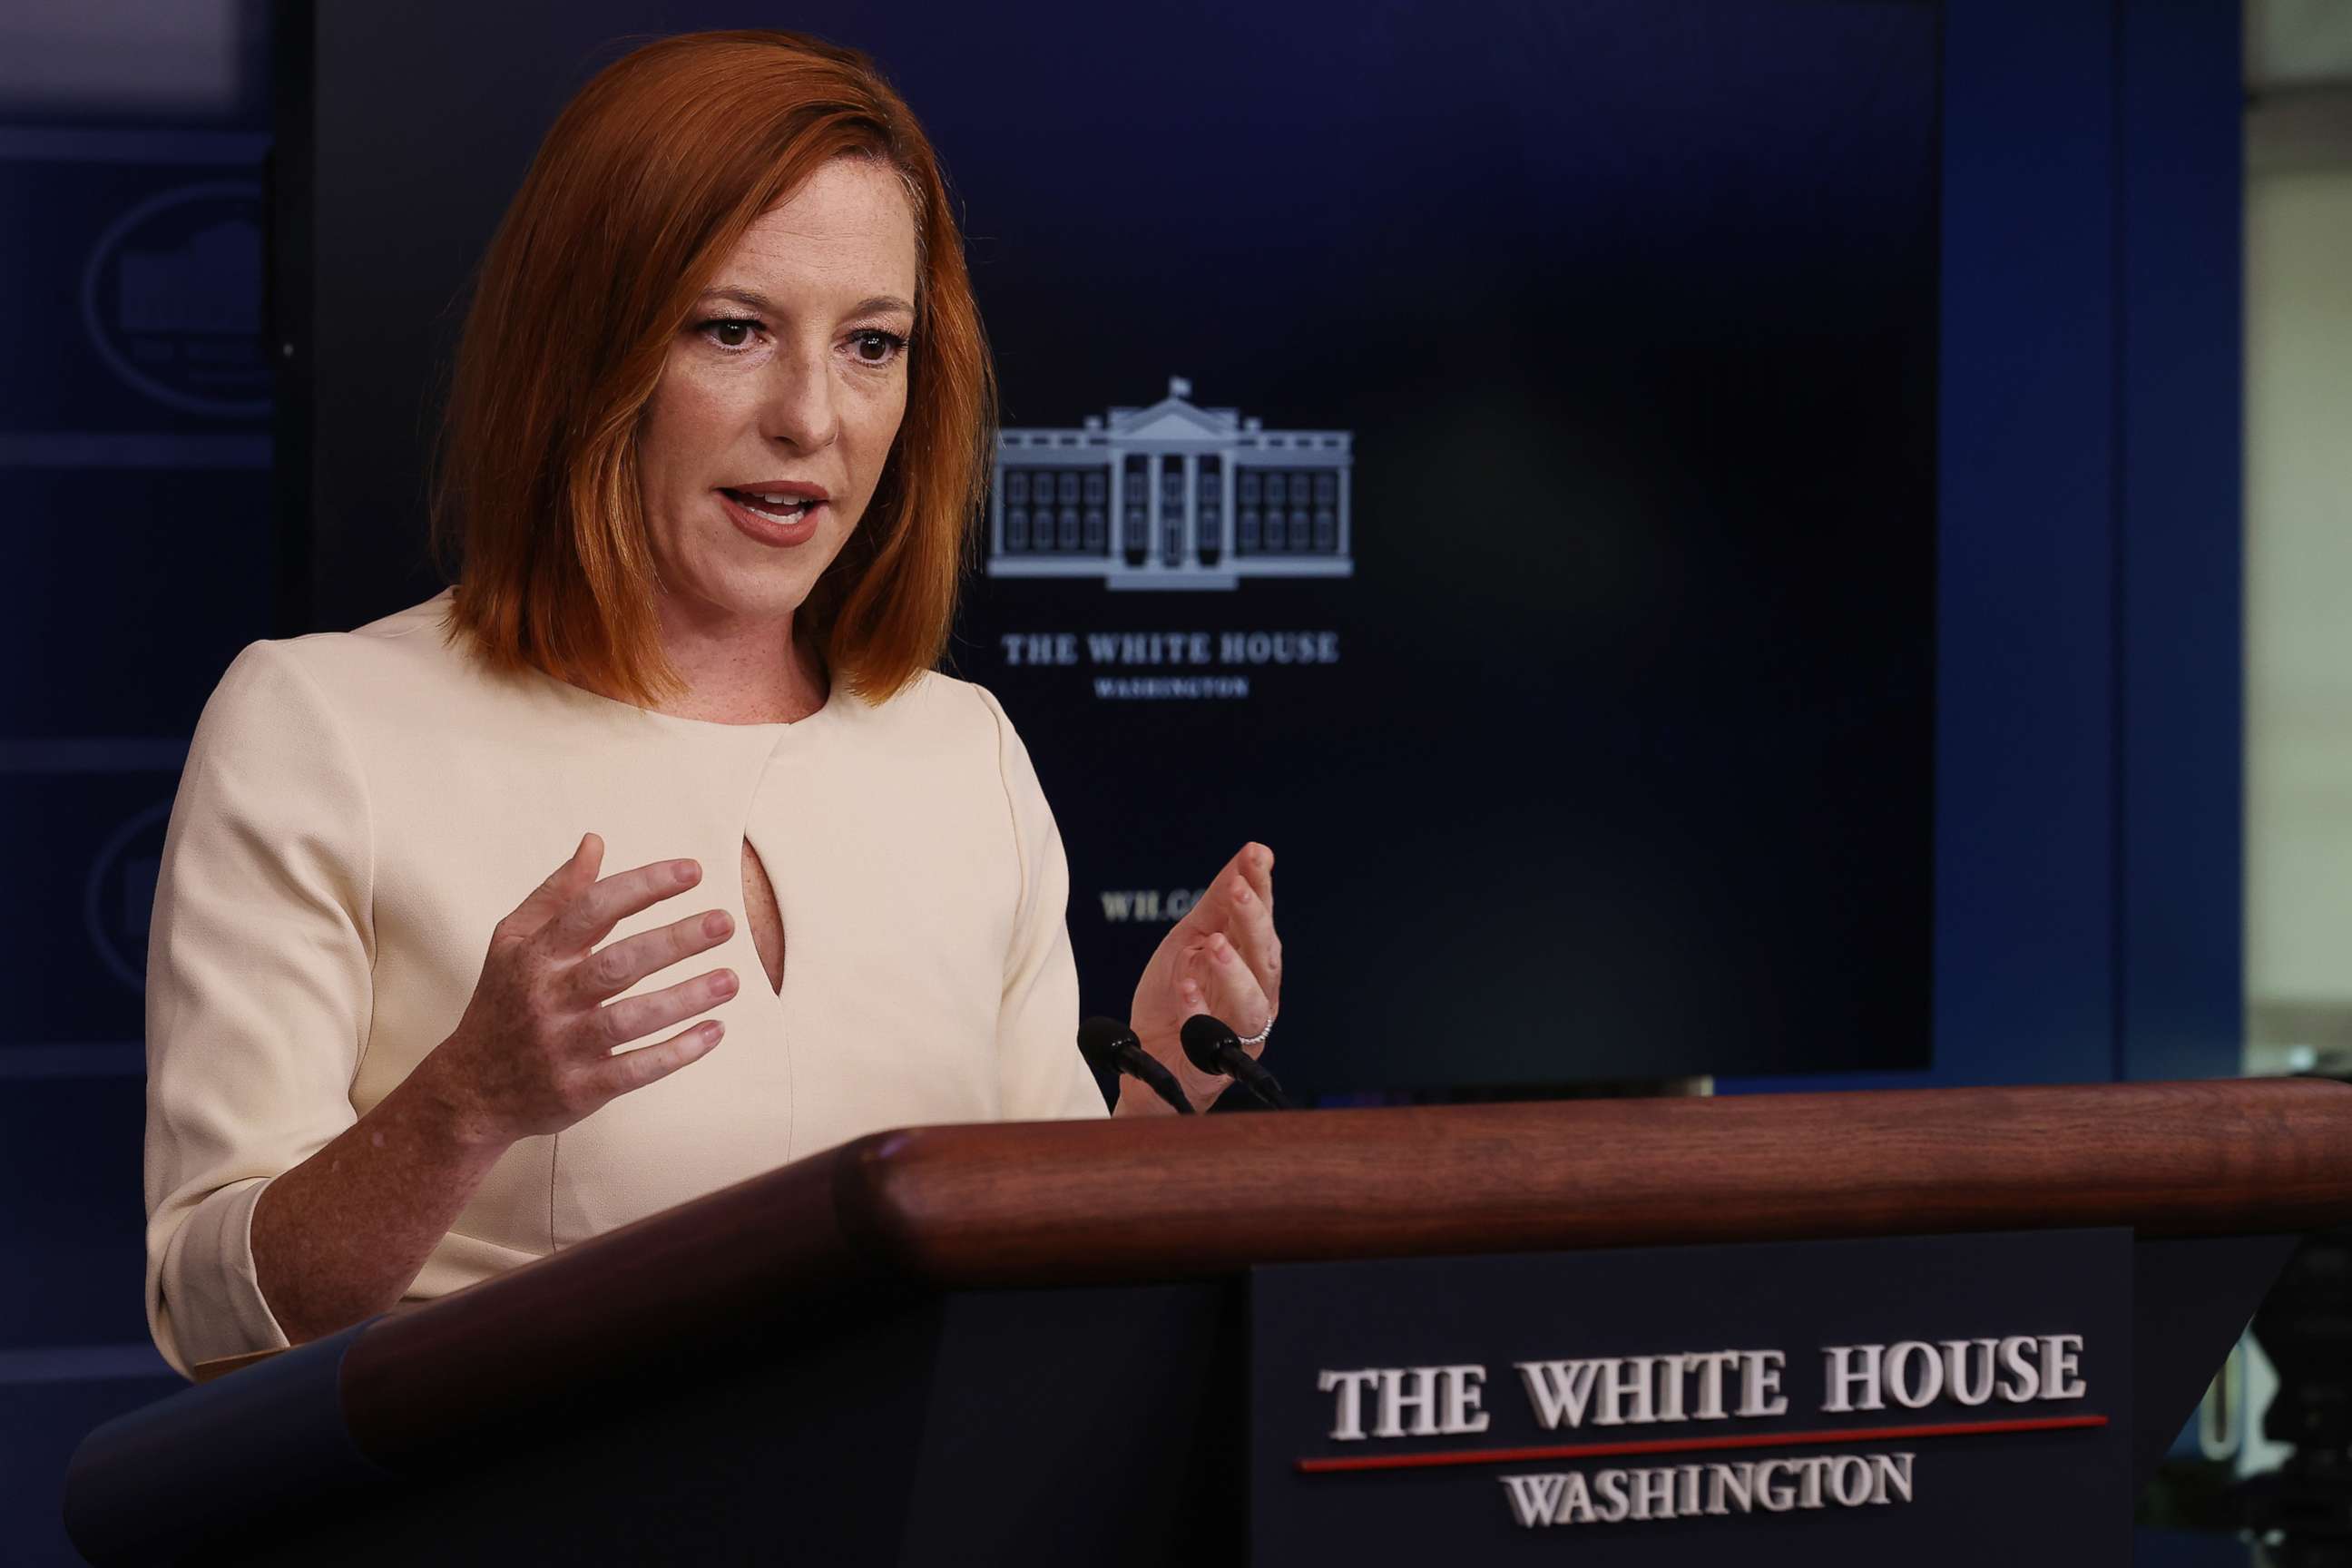 PHOTO: White House Press Secretary Jen Psaki calls on reporters during the daily news conference in the Brady Press Briefing Room at the White House on Oct. 4, 2021, in Washington, D.C.